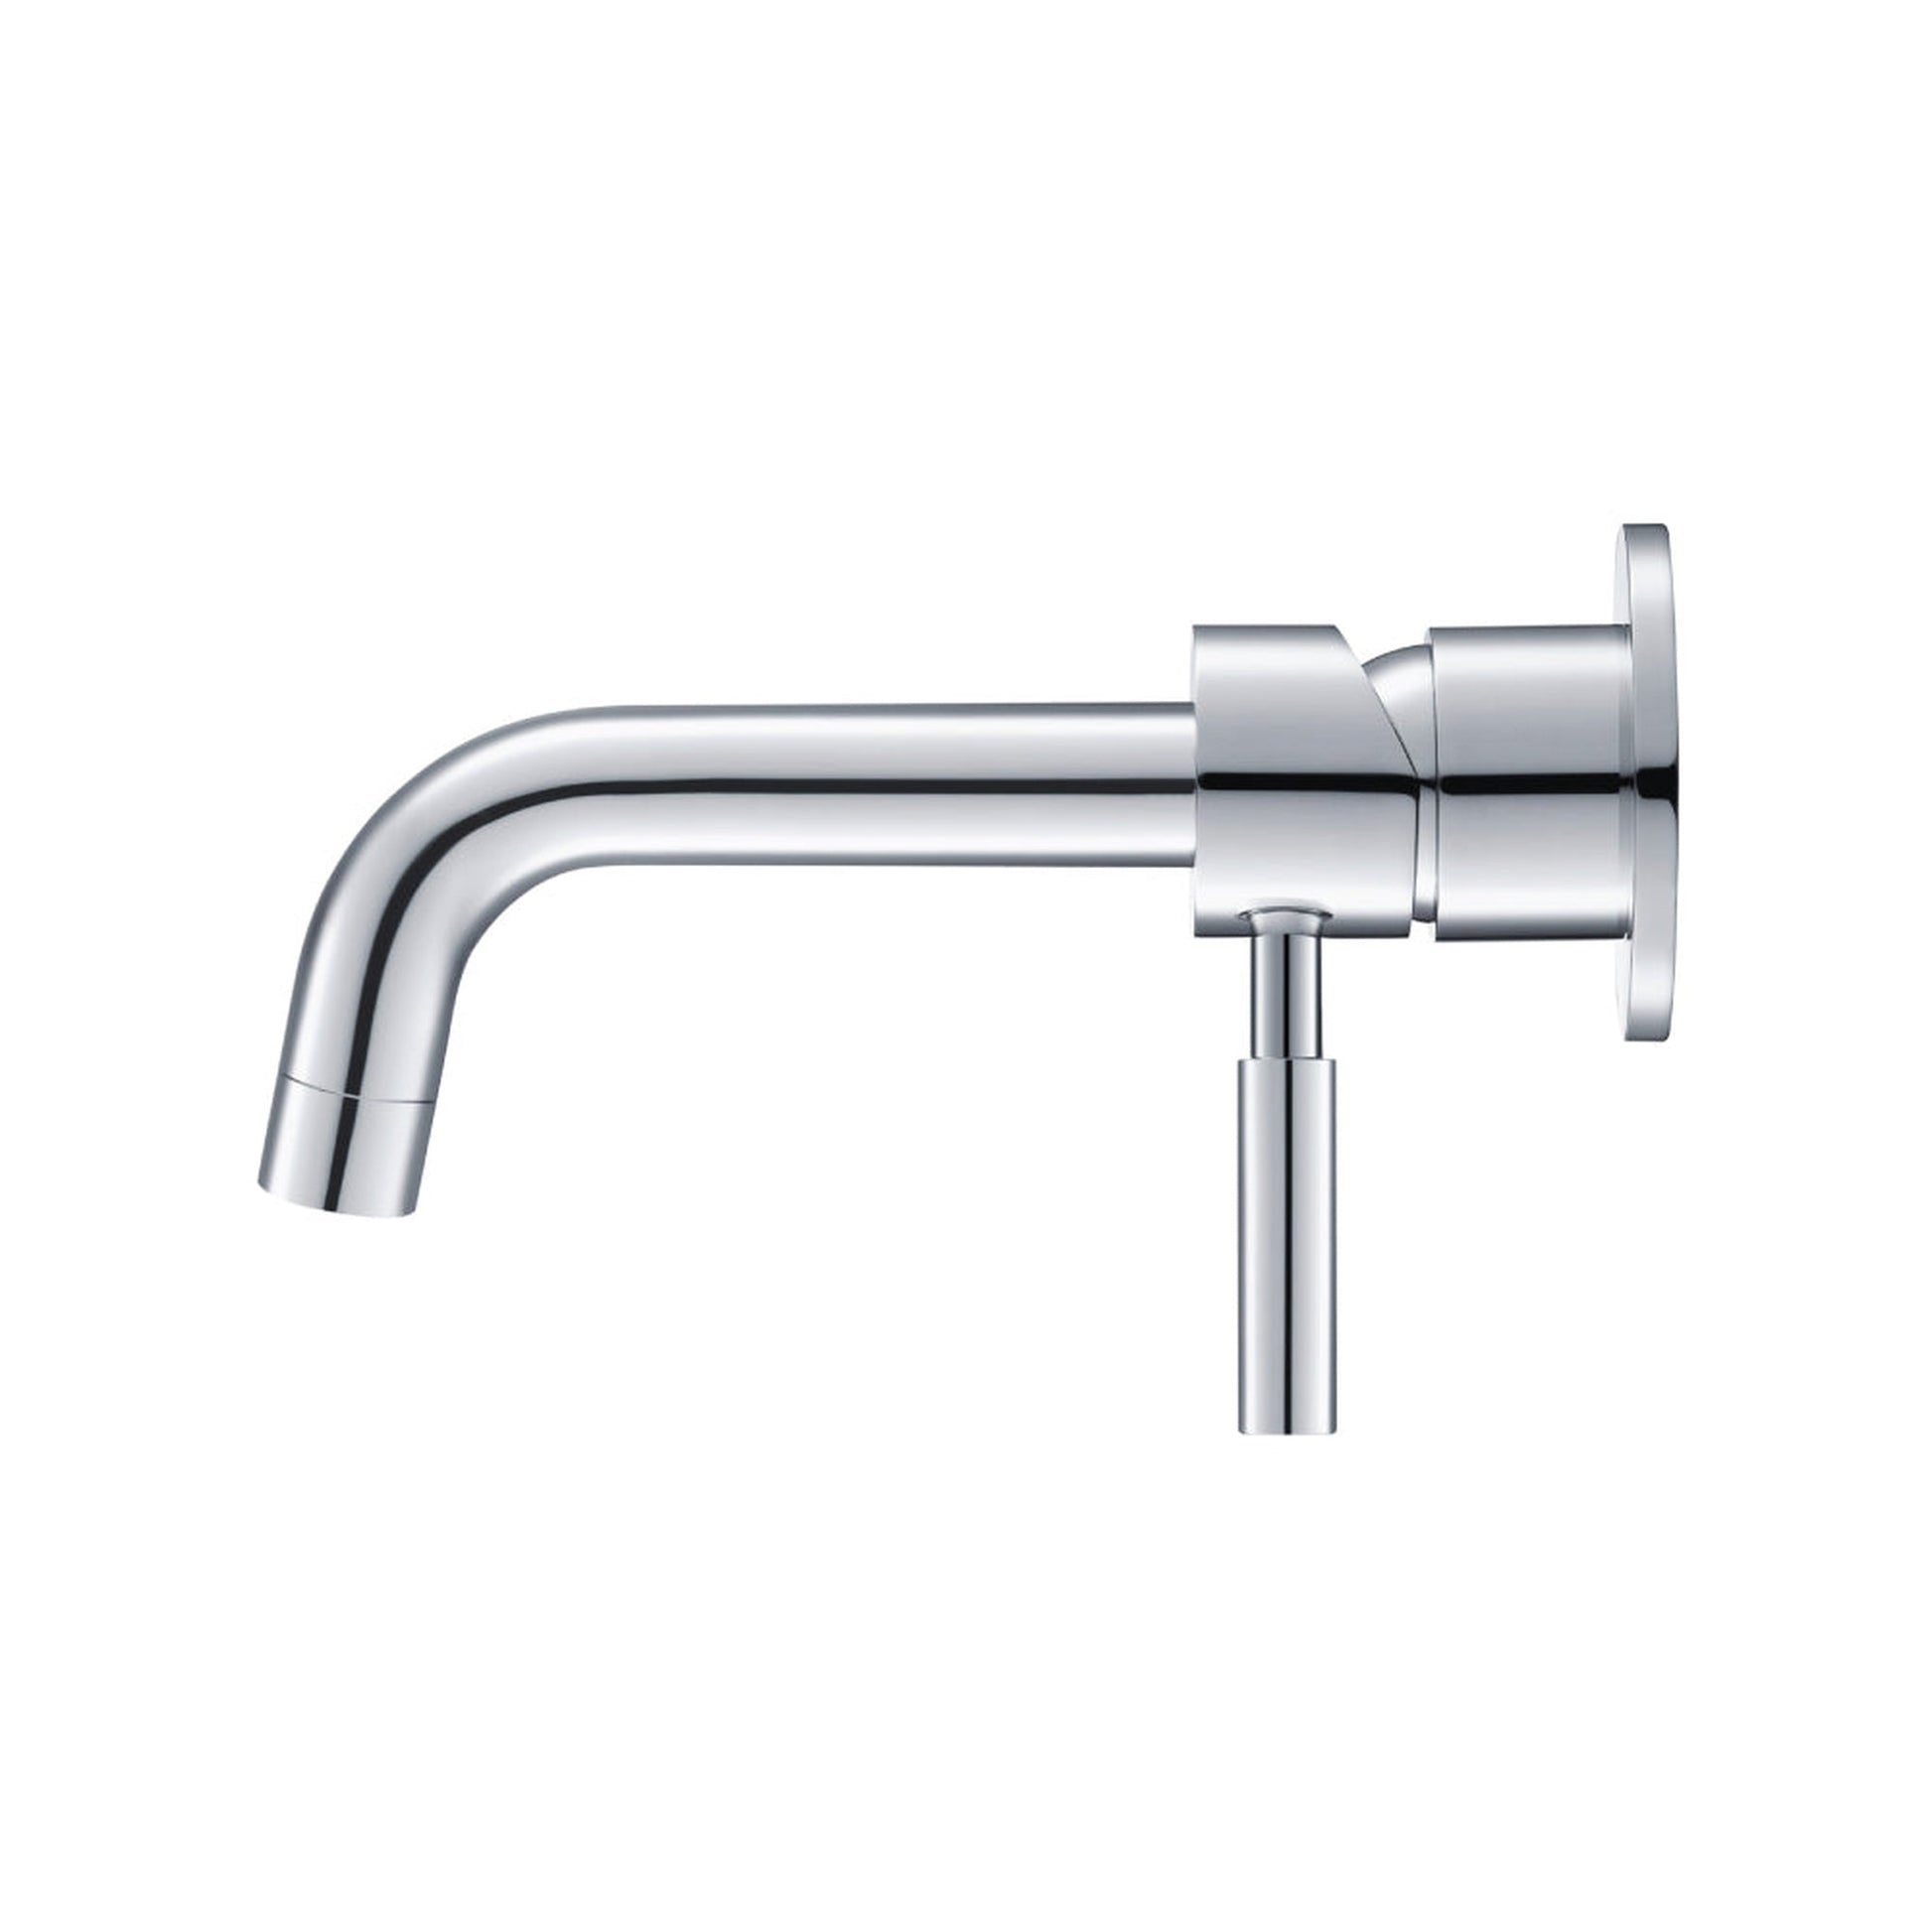 Isenberg Serie 100 6" Two-Hole Chrome Wall-Mounted Bathroom Sink Faucet With Rough In Valve